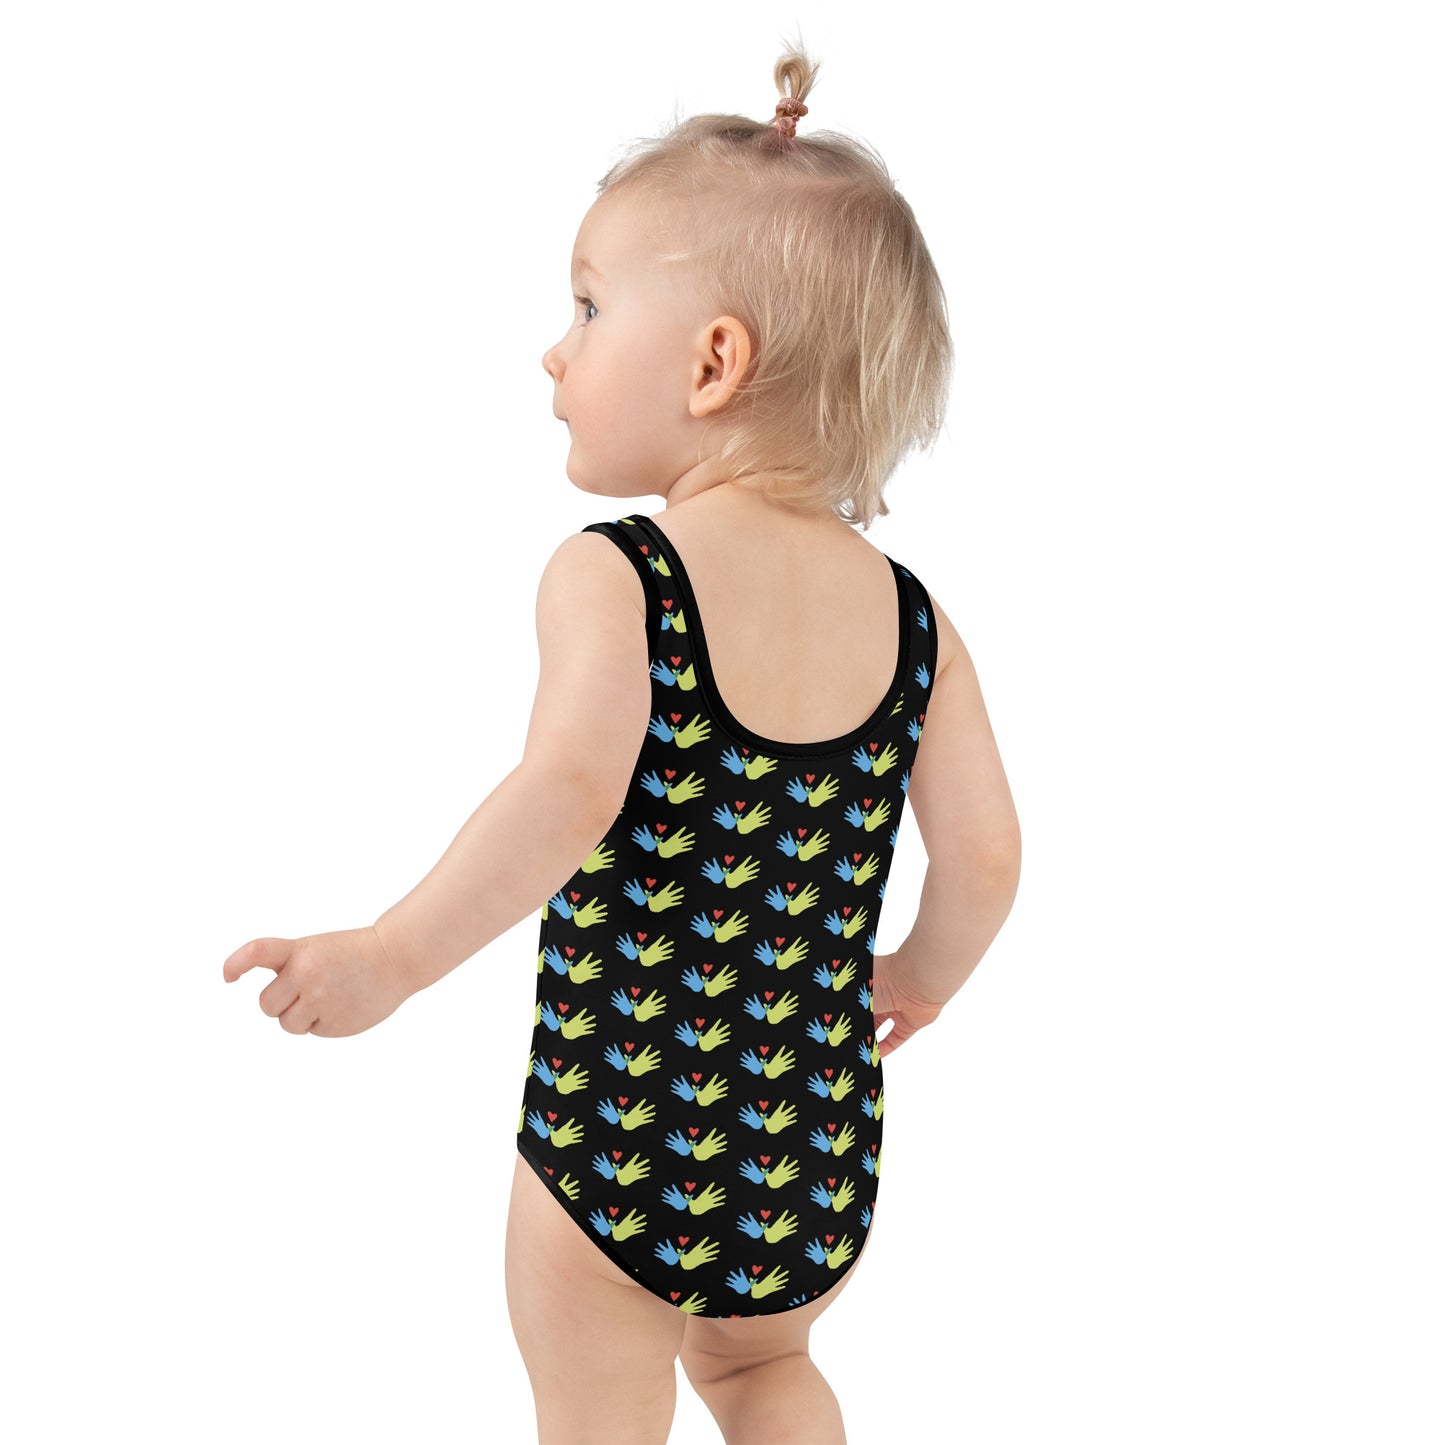 Williams Syndrome Association — Kids Swimsuit